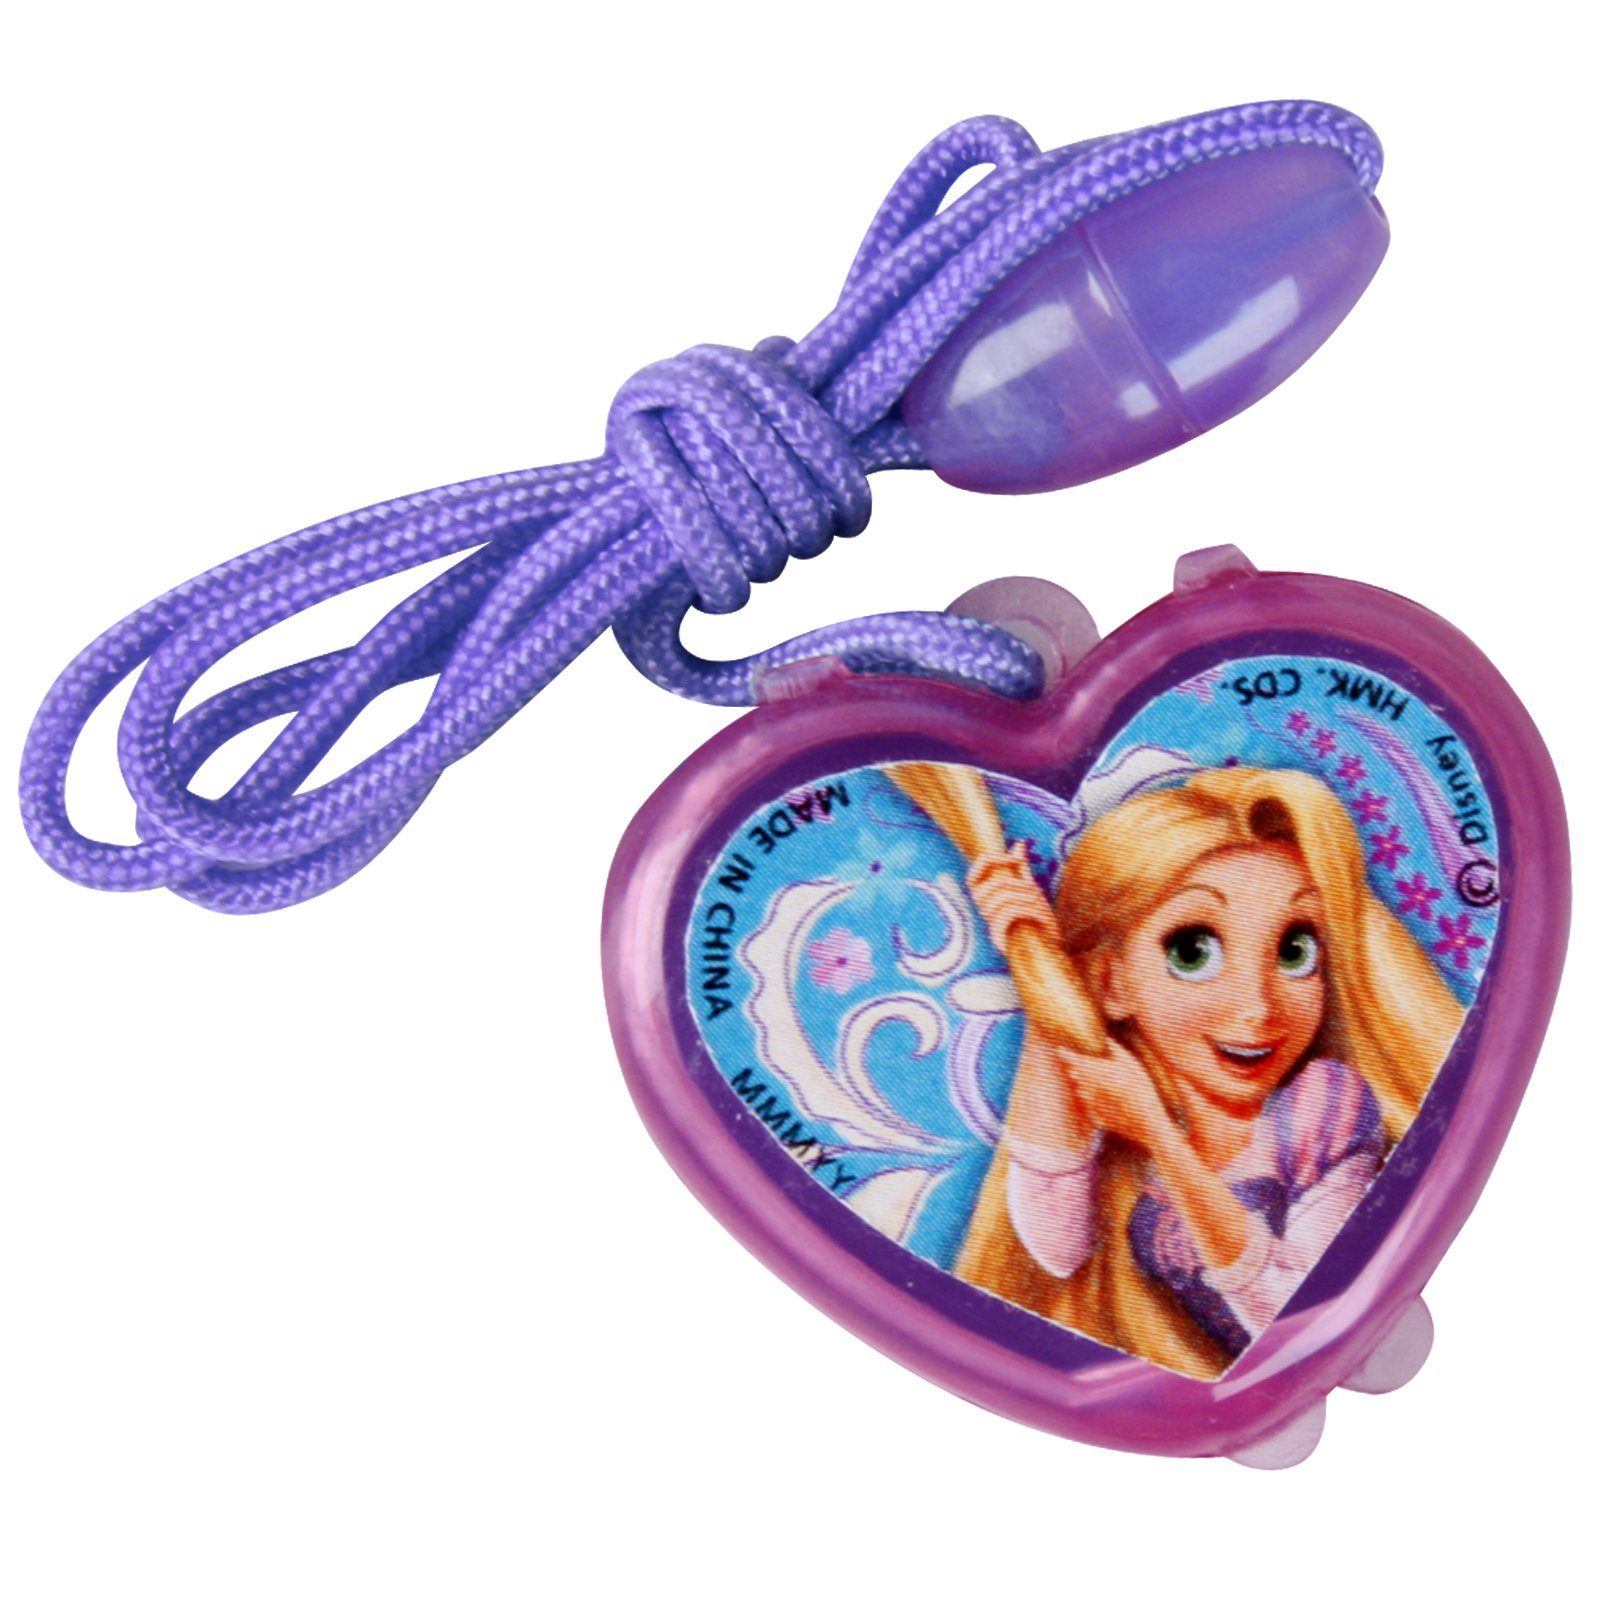 Disney's Tangled Lipgloss Necklaces (4 count)